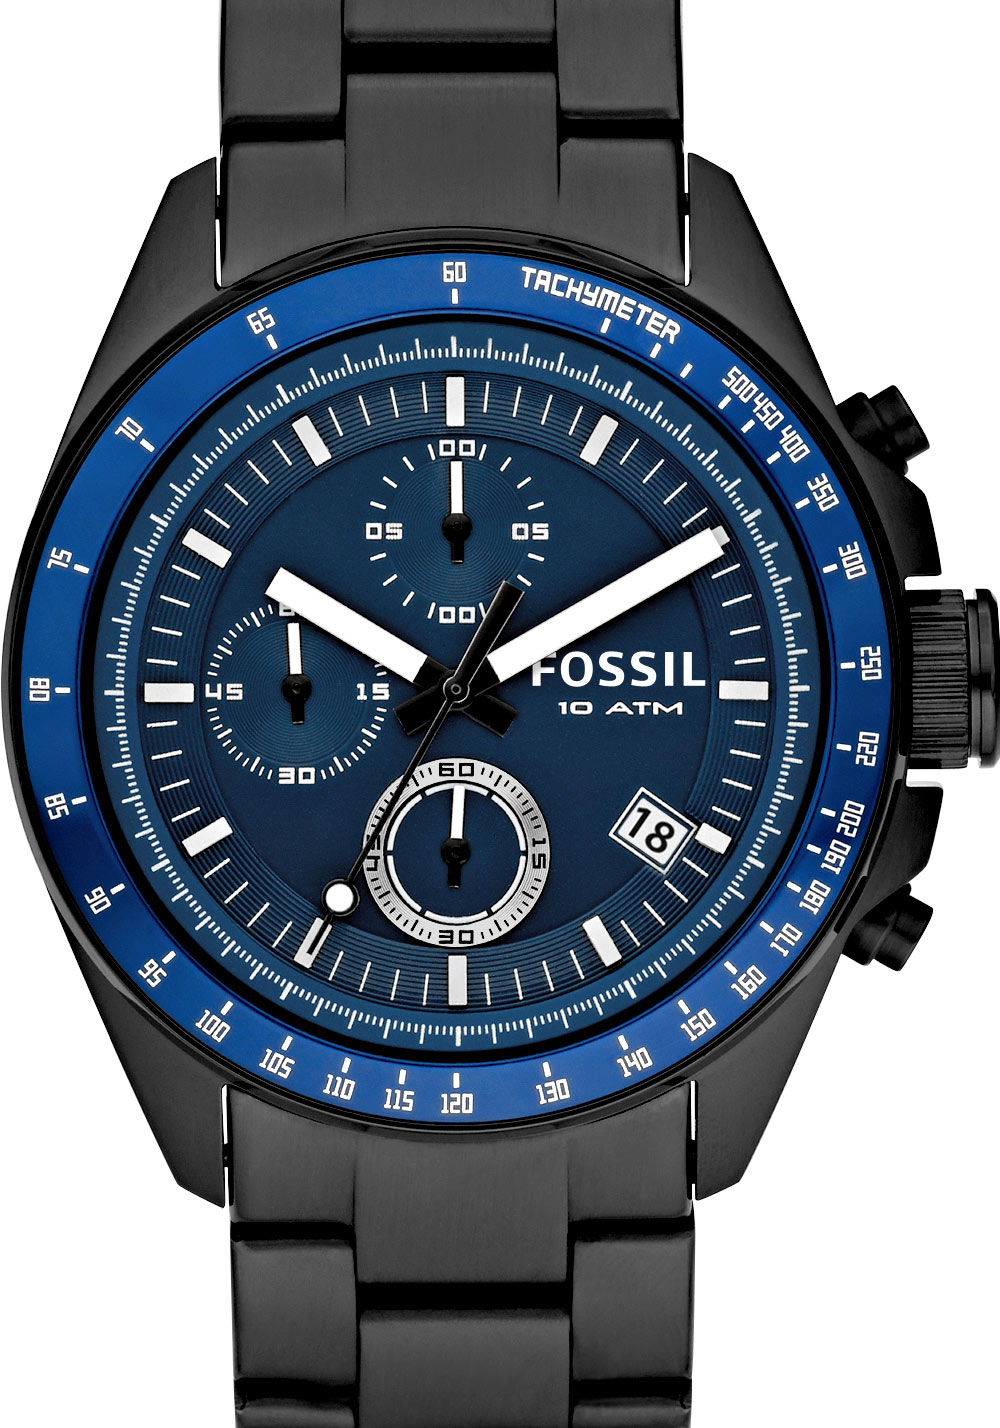 FOSSIL ON SALE AT WATCHISMO - Under $99 For Select Fossil Watches